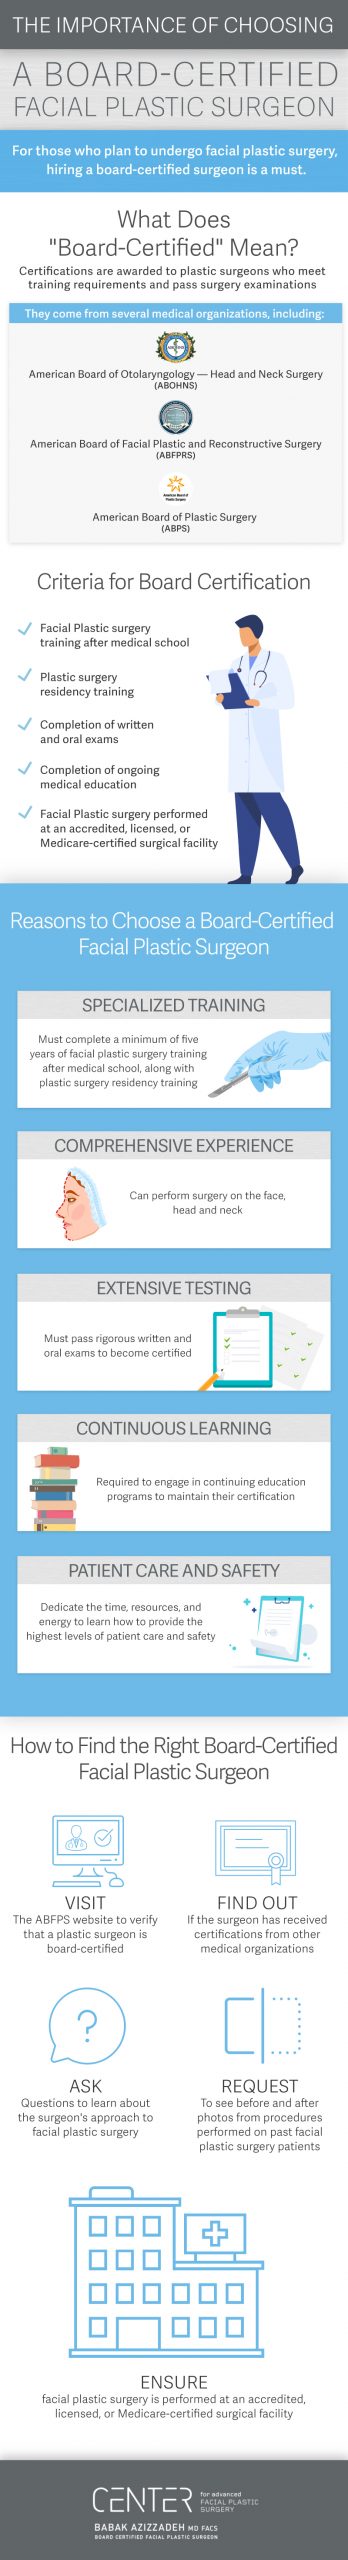 The Importance of Choosing a Board-Certified Facial Plastic Surgeon